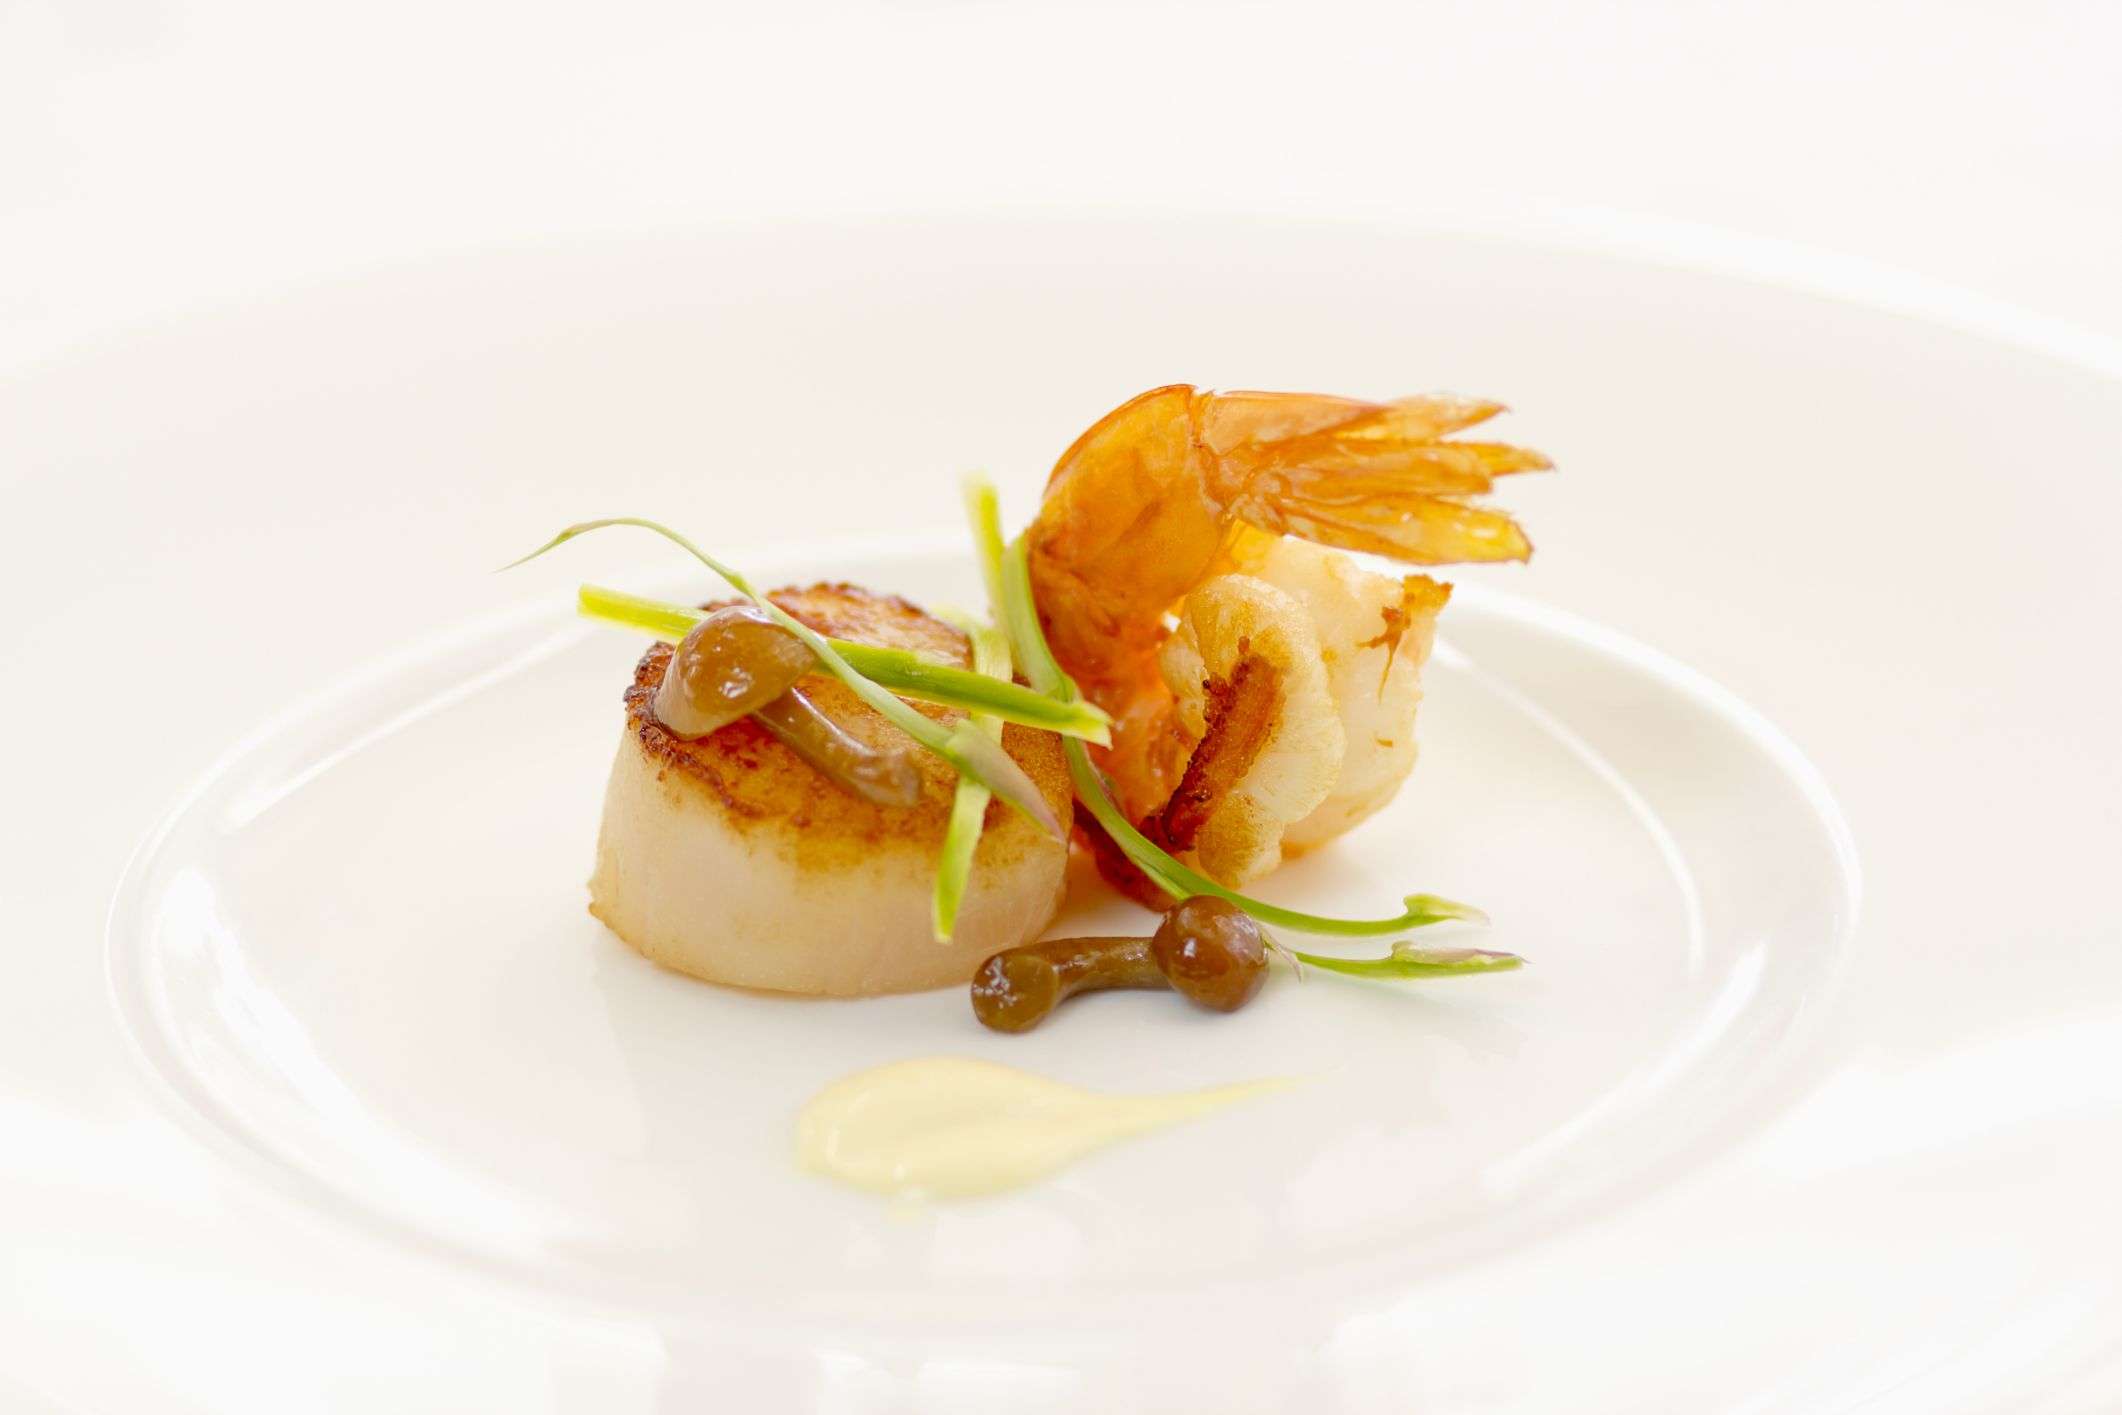 Shrimp and Scallops as Part of a Low